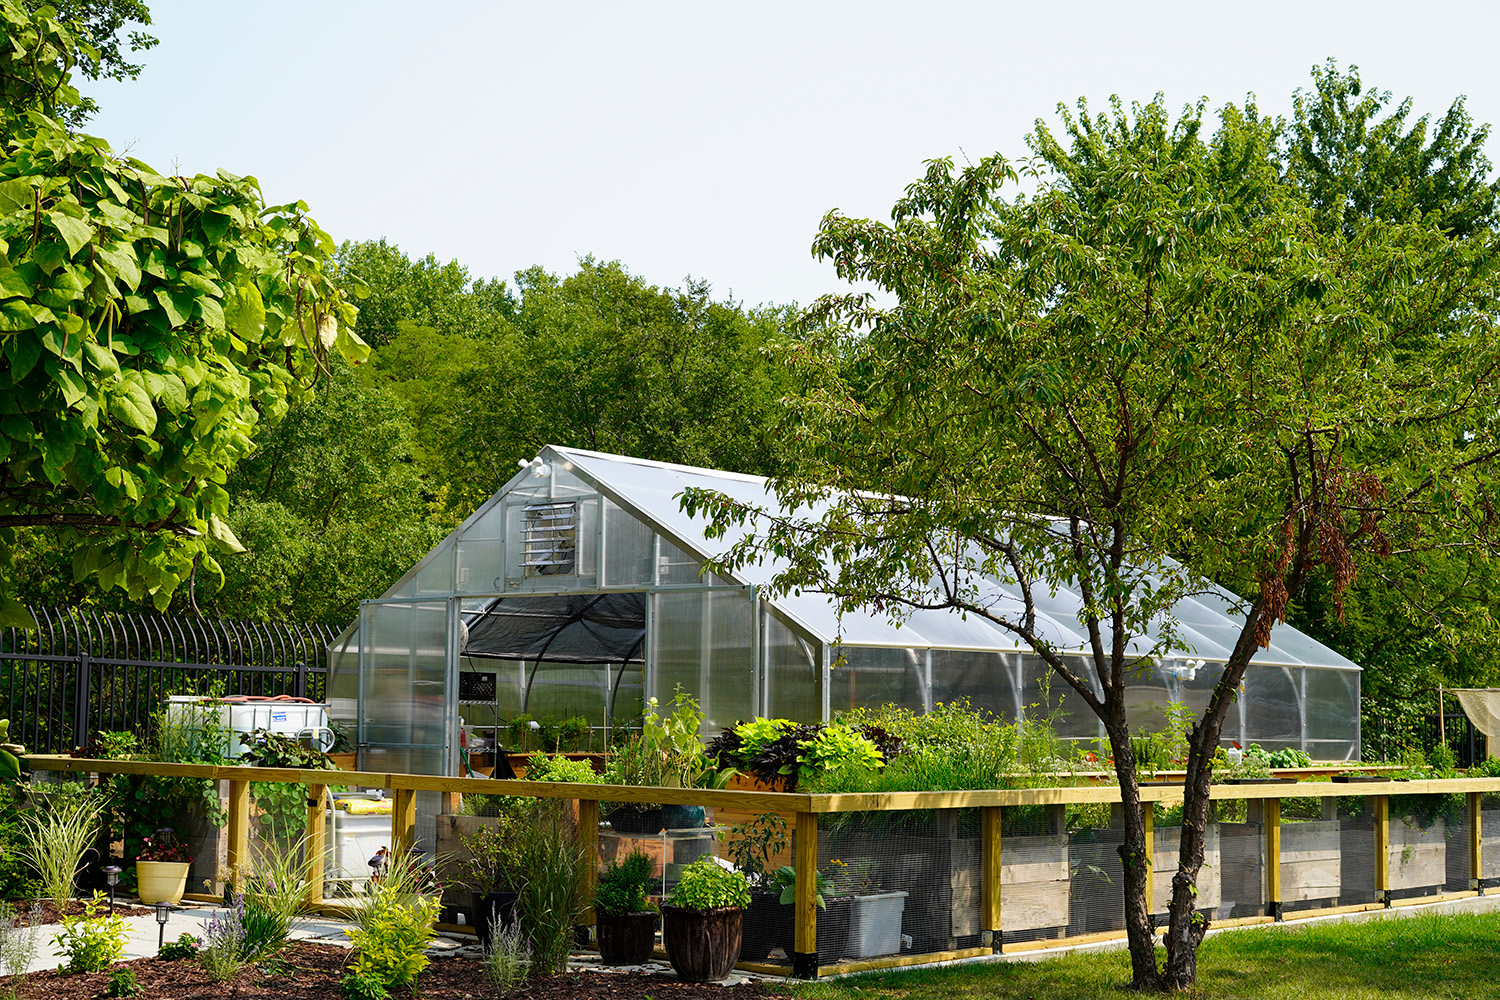 Edens Garden's Commitment To Sustainability